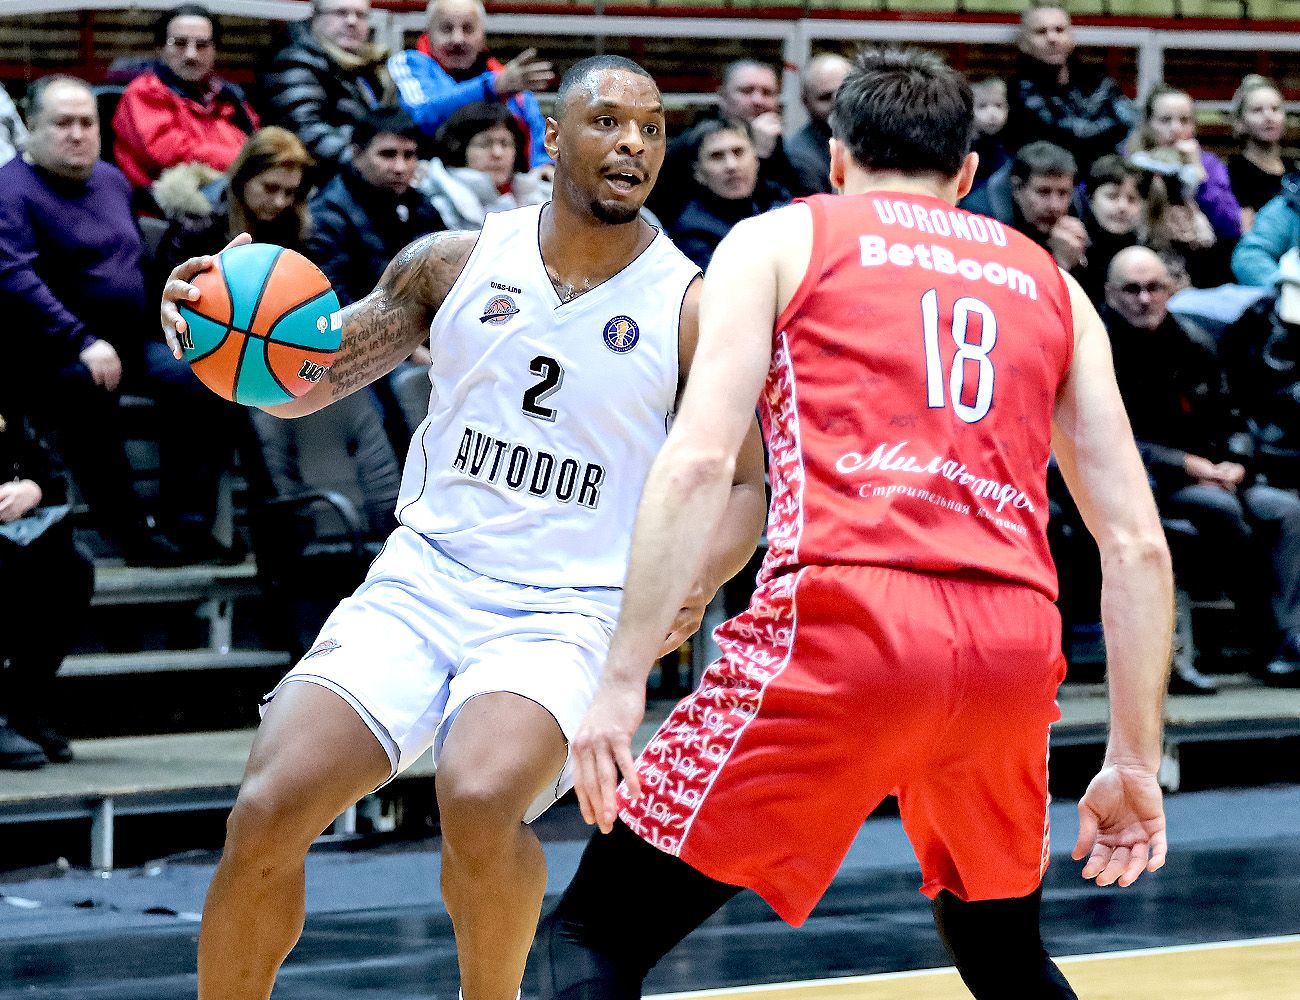 Avtodor starts December with the win over the League newcomer